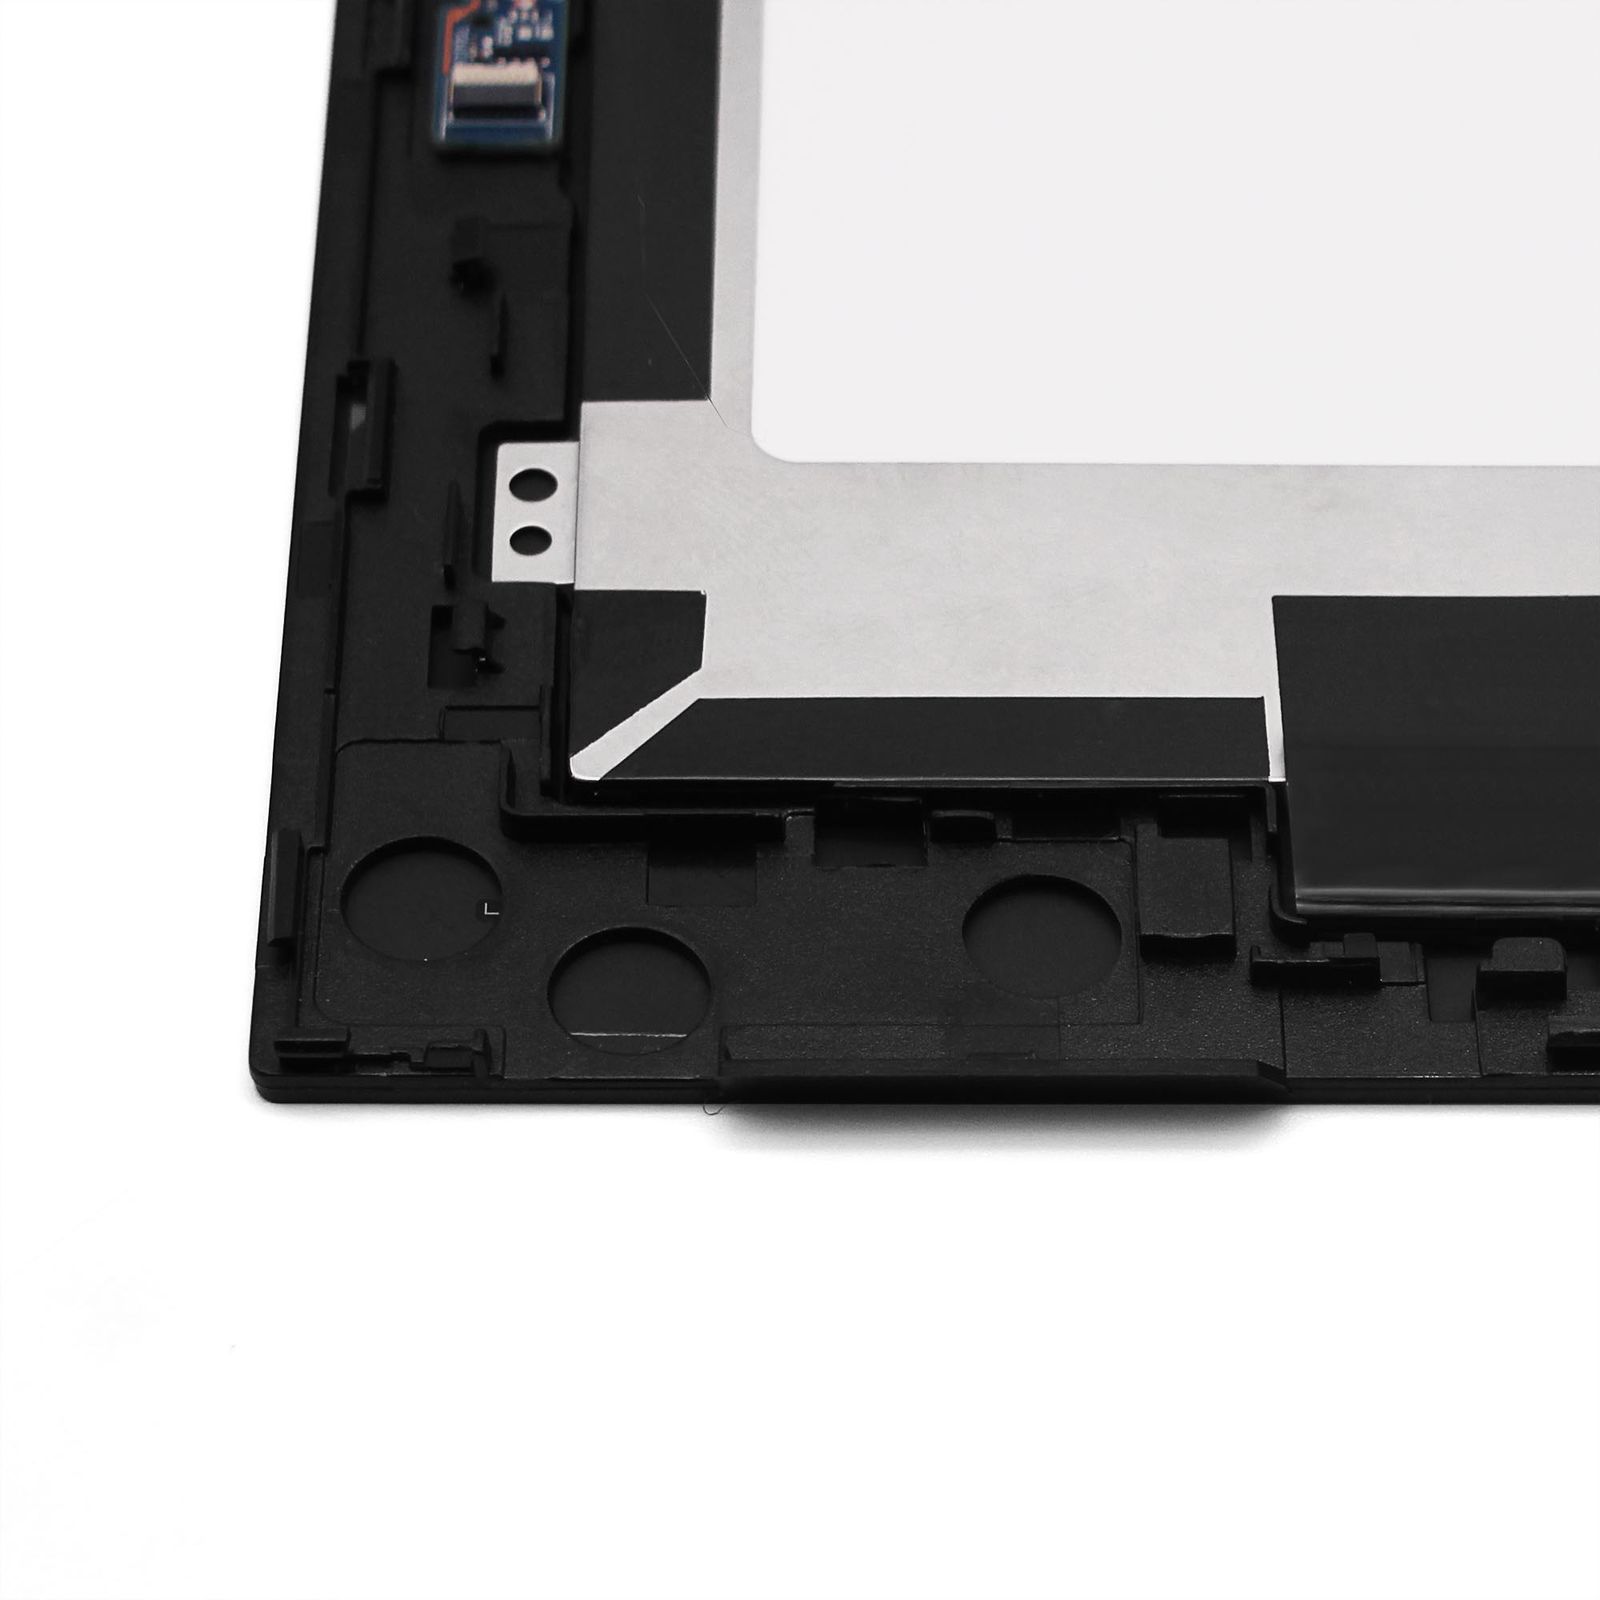 Screen Display Replacement For HP PAVILION 11-U007UR LCD Touch Digitizer Assembly